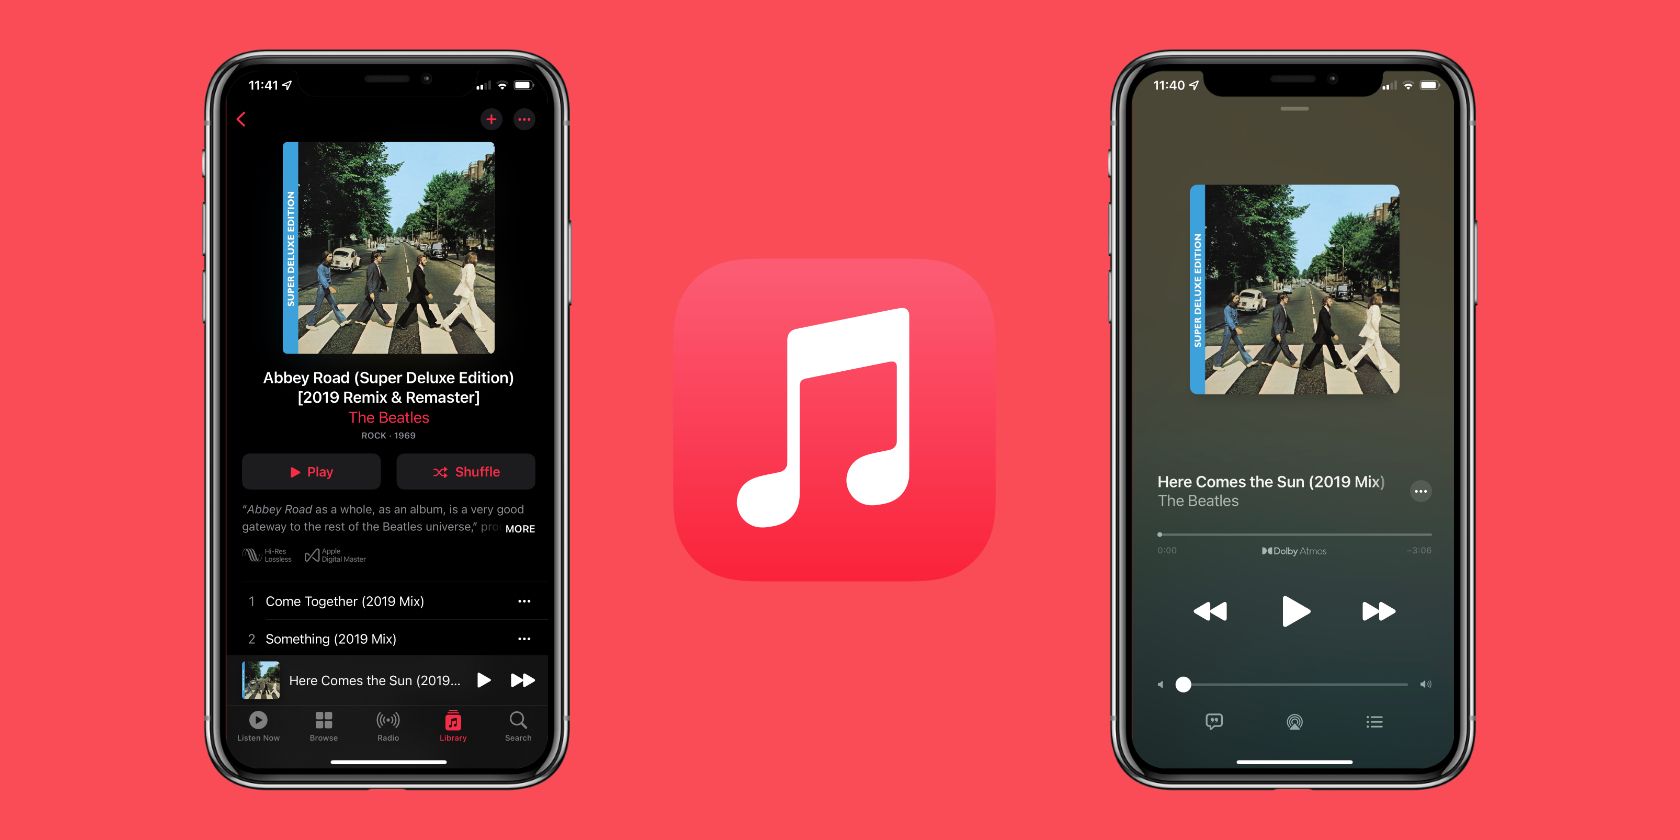 Screenshots of Spatial and Lossless tracks on Apple Music with the Apple Music logo.